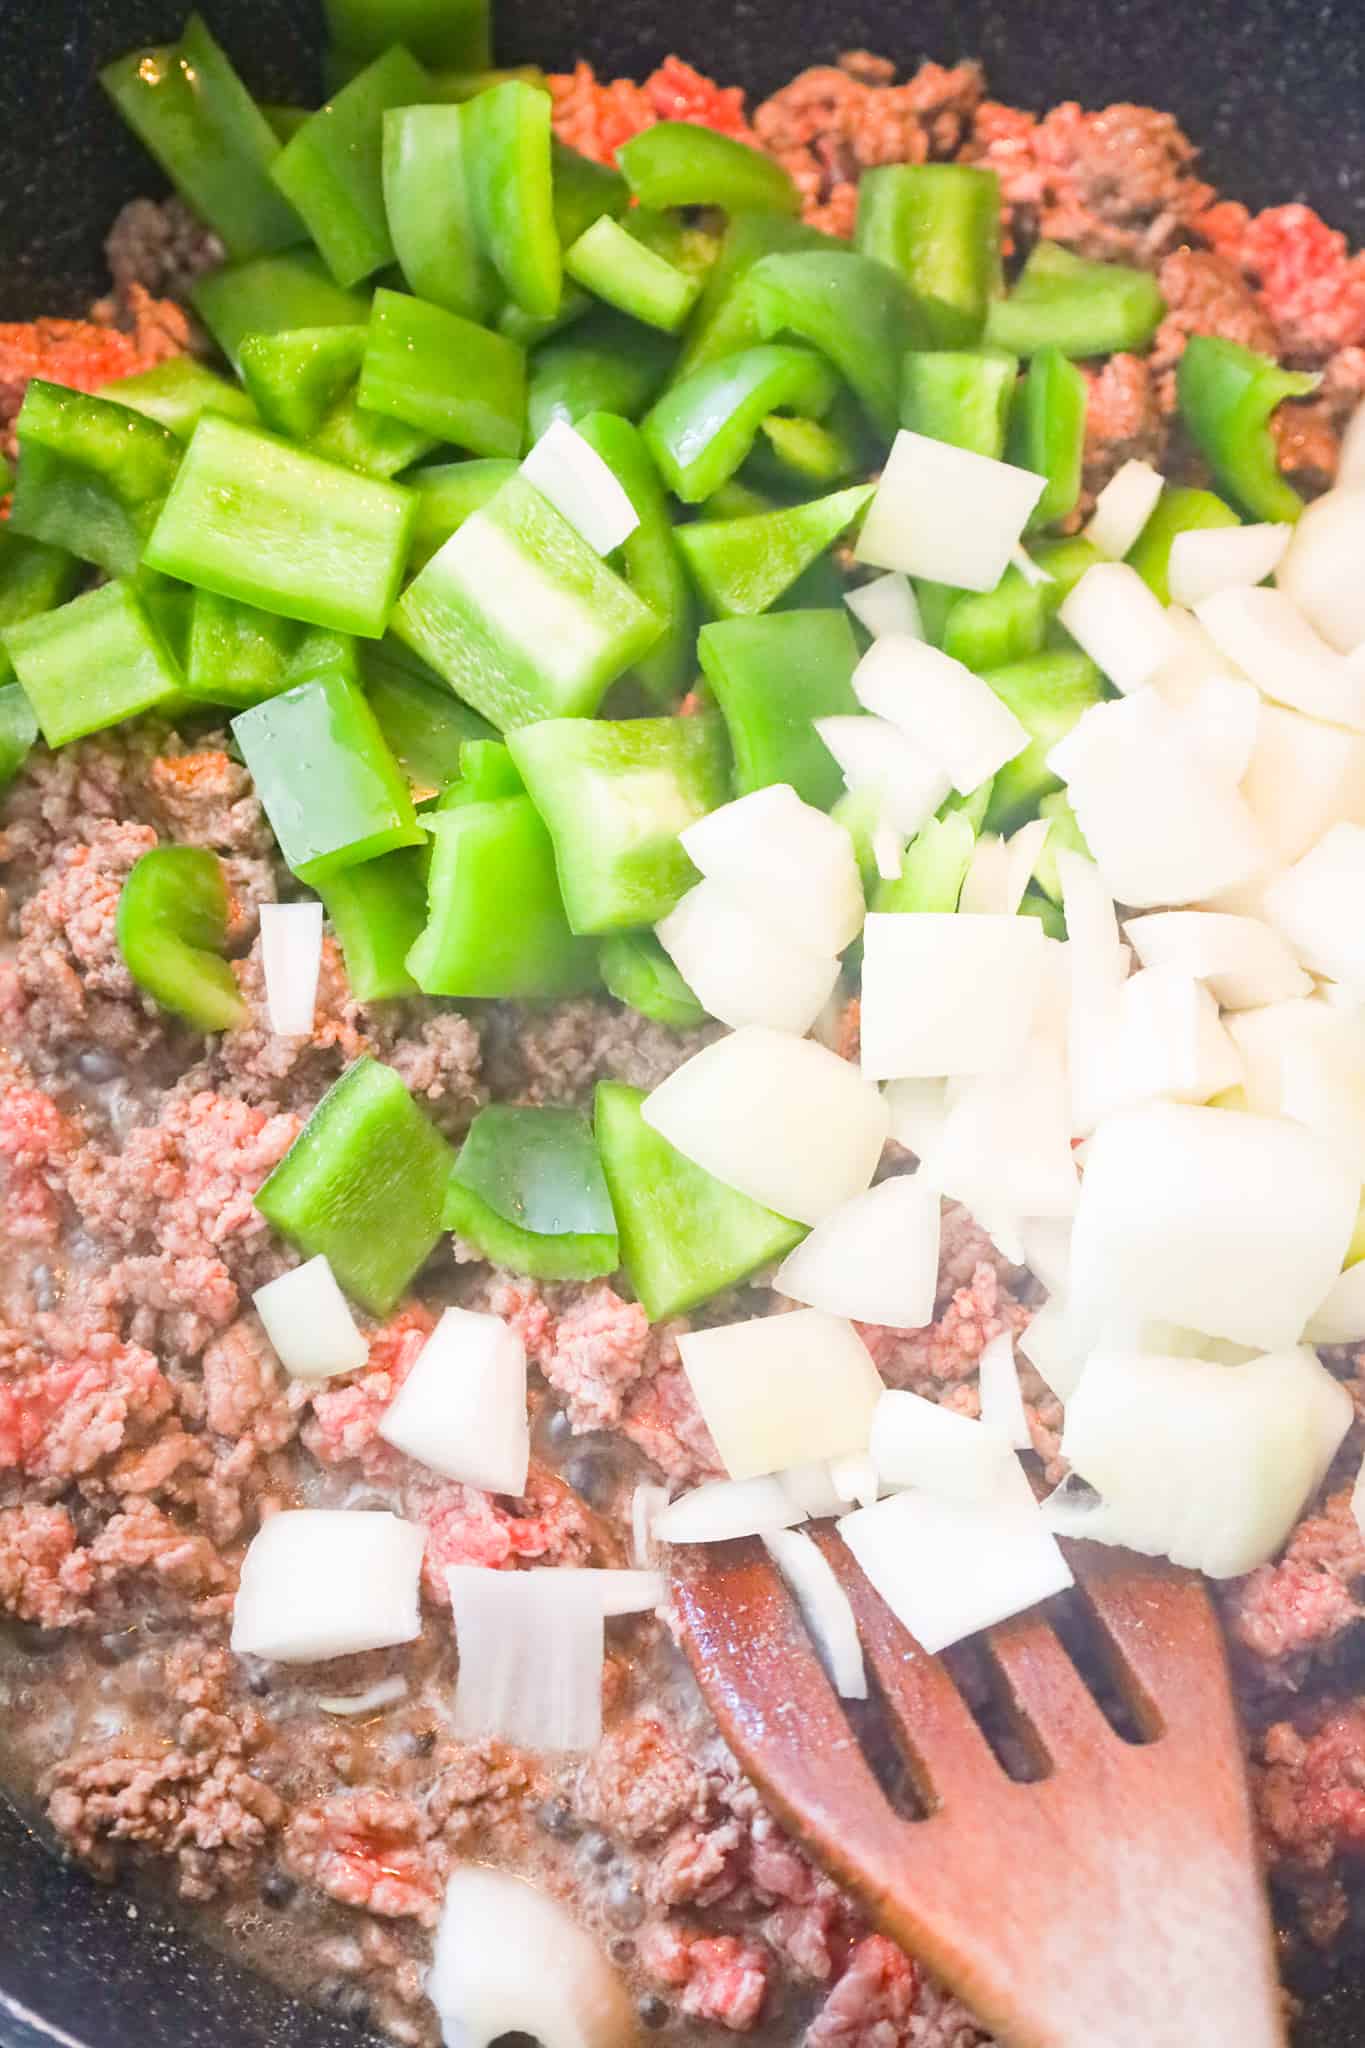 diced onions and diced green peppers on top of ground beef in a saute pan